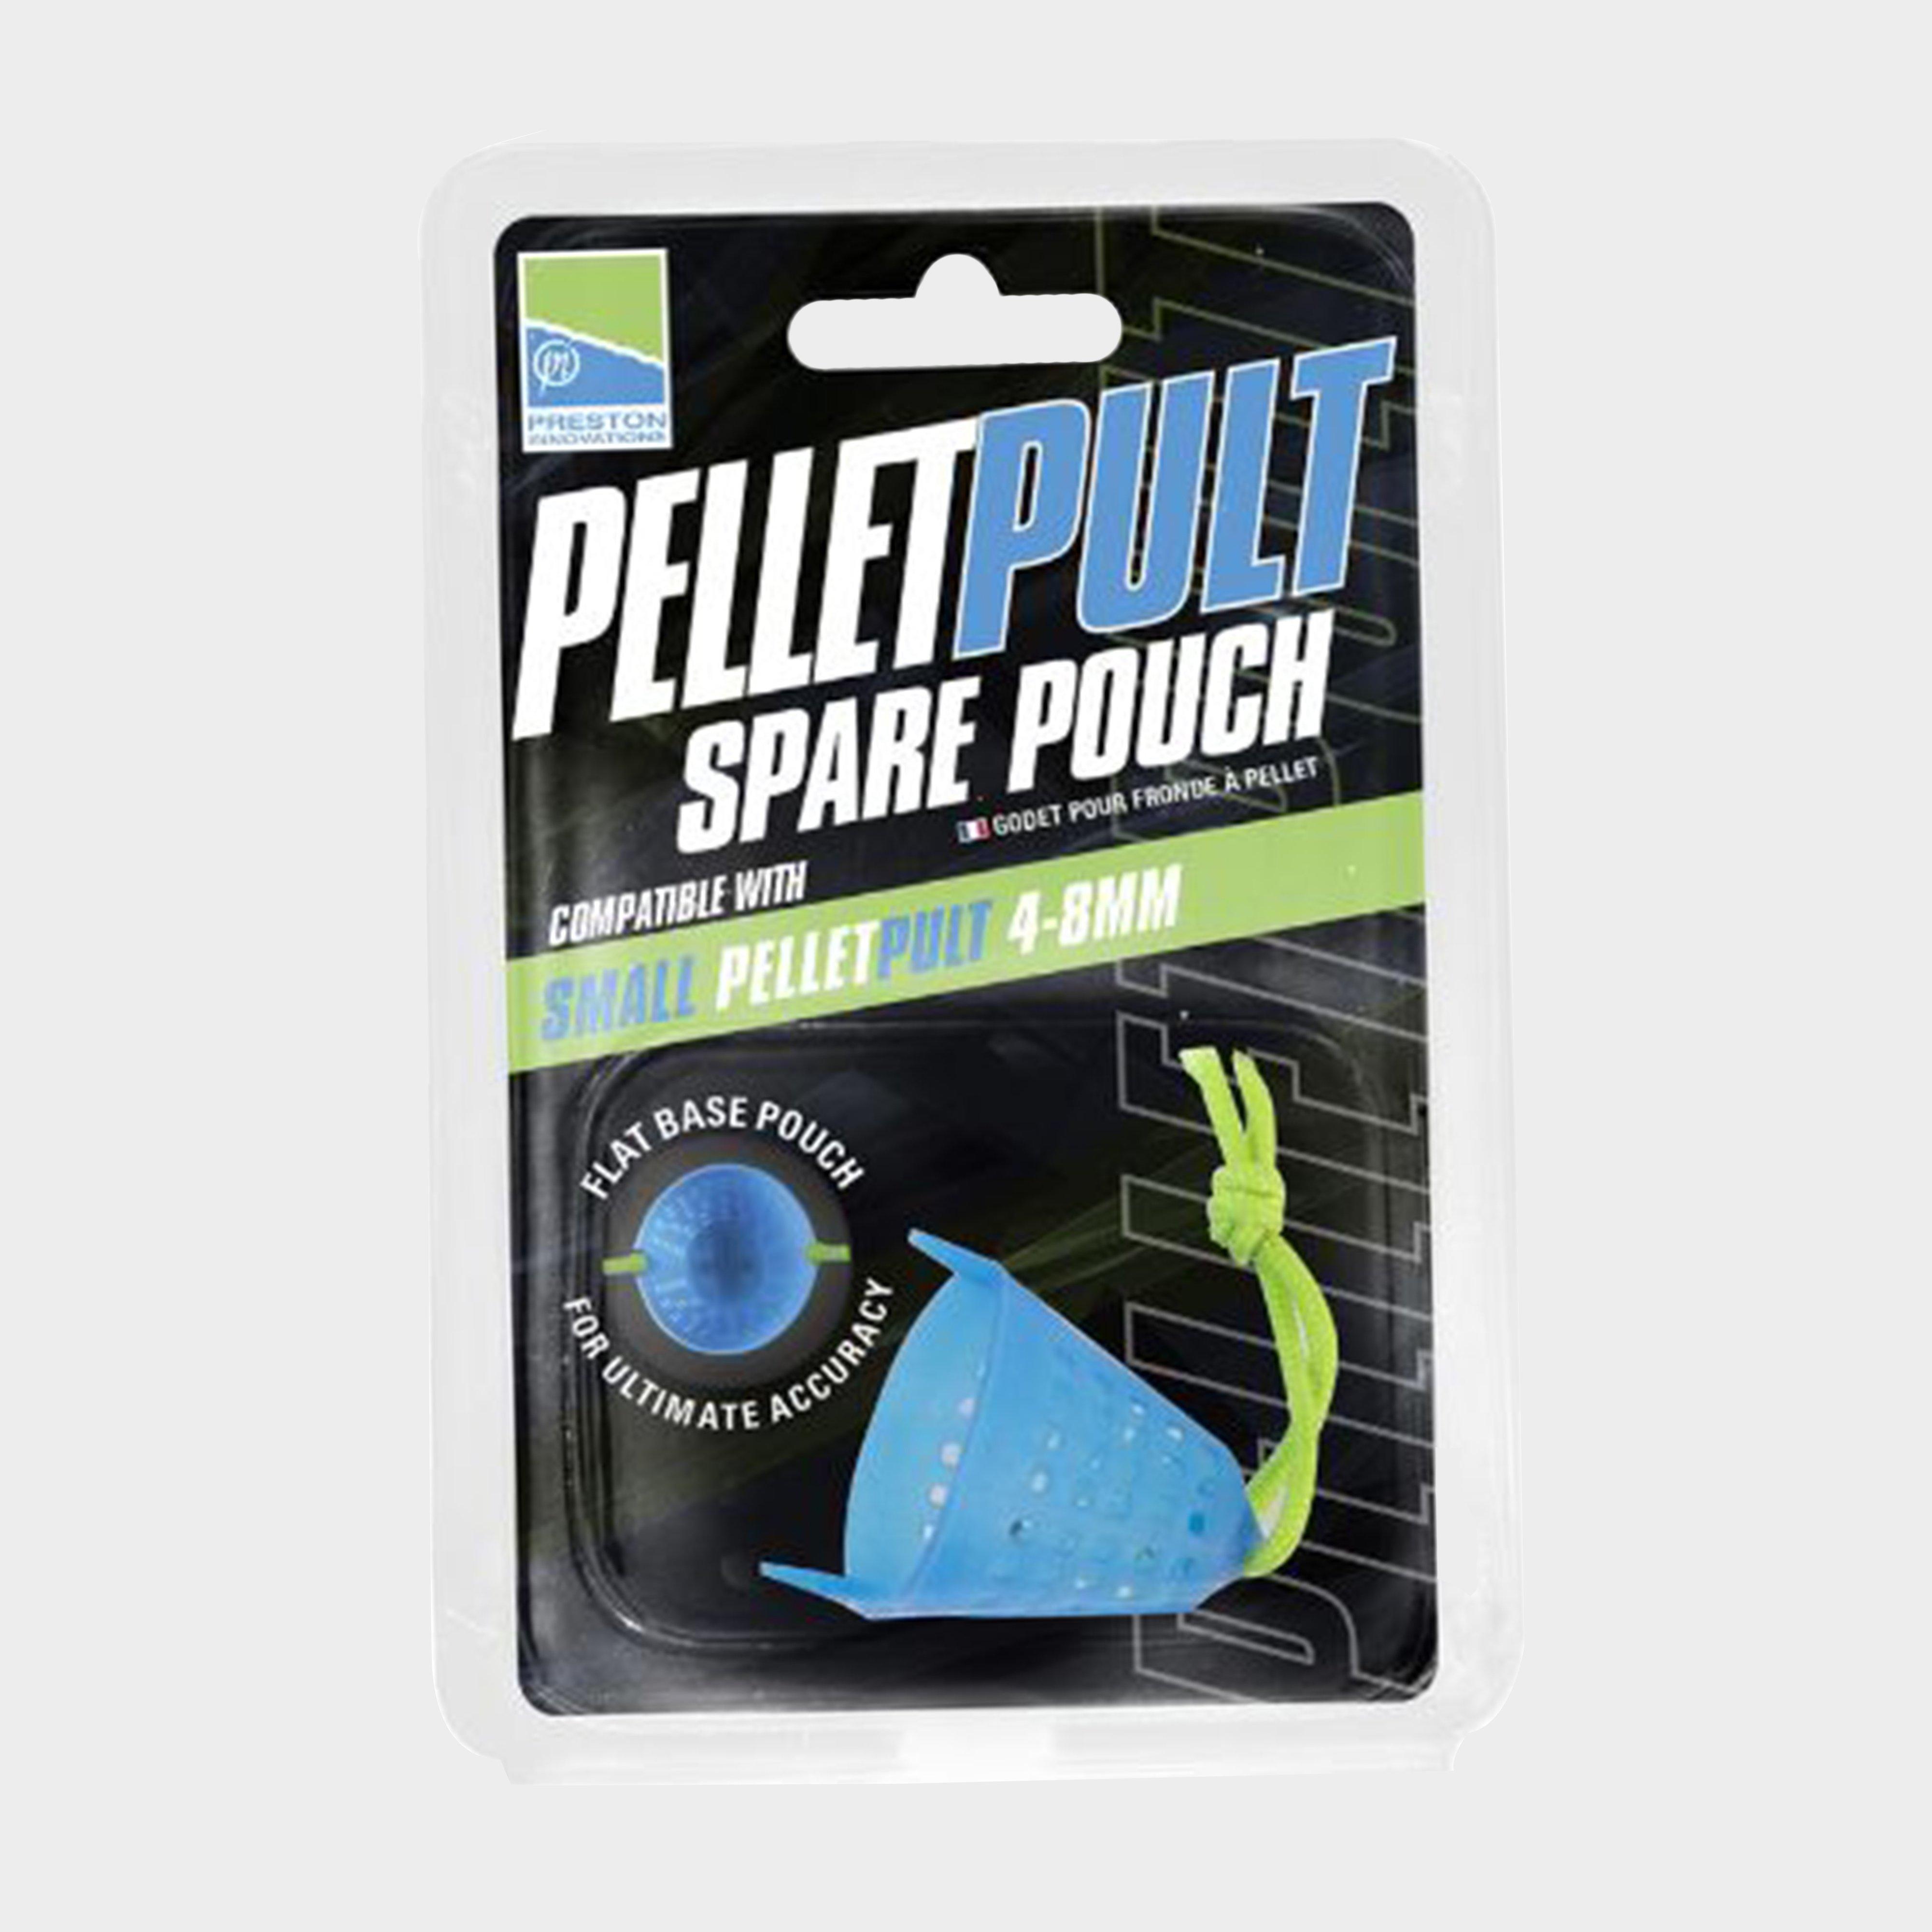 Photos - Other for Fishing Preston INNOVATION Pelletpult Spare Pouch - Small, Black 